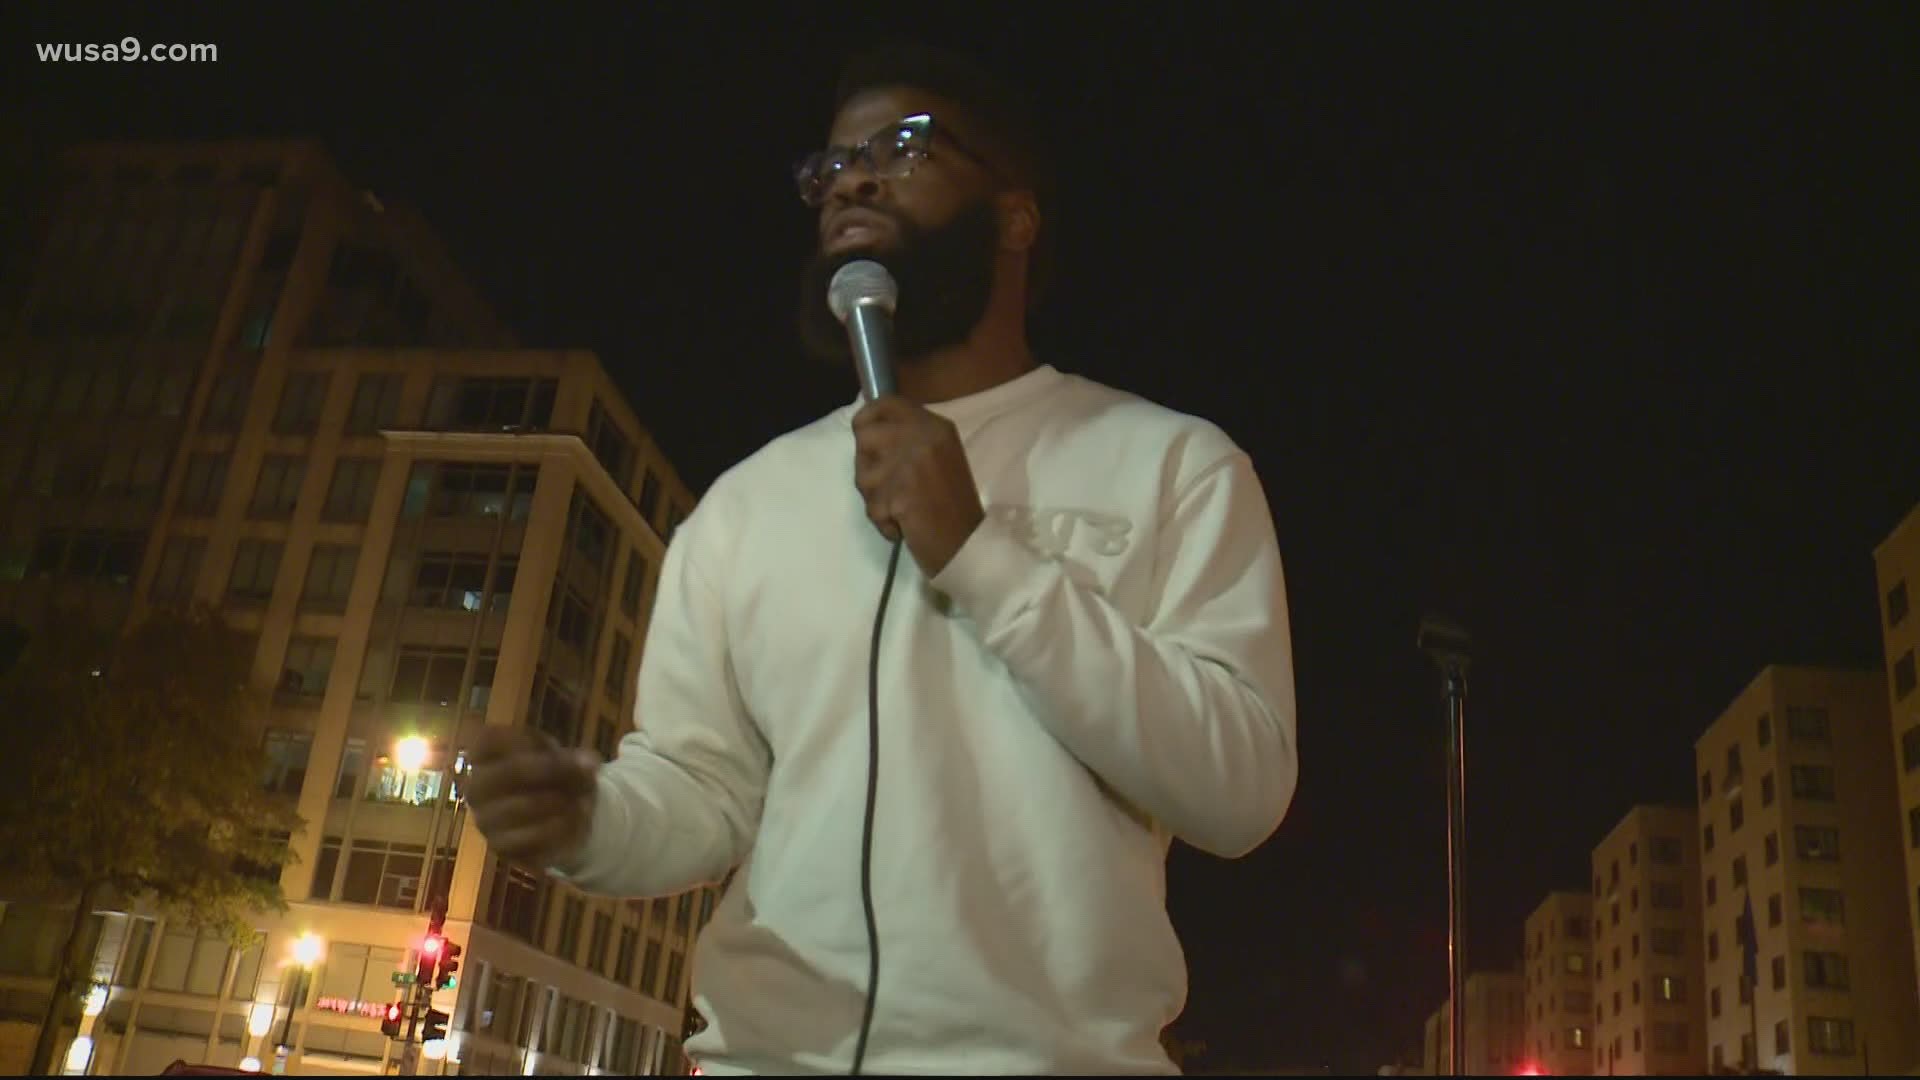 Kenny Sway used his musical talents to move crowds during protests this summer, and now he's back to "share his gift."